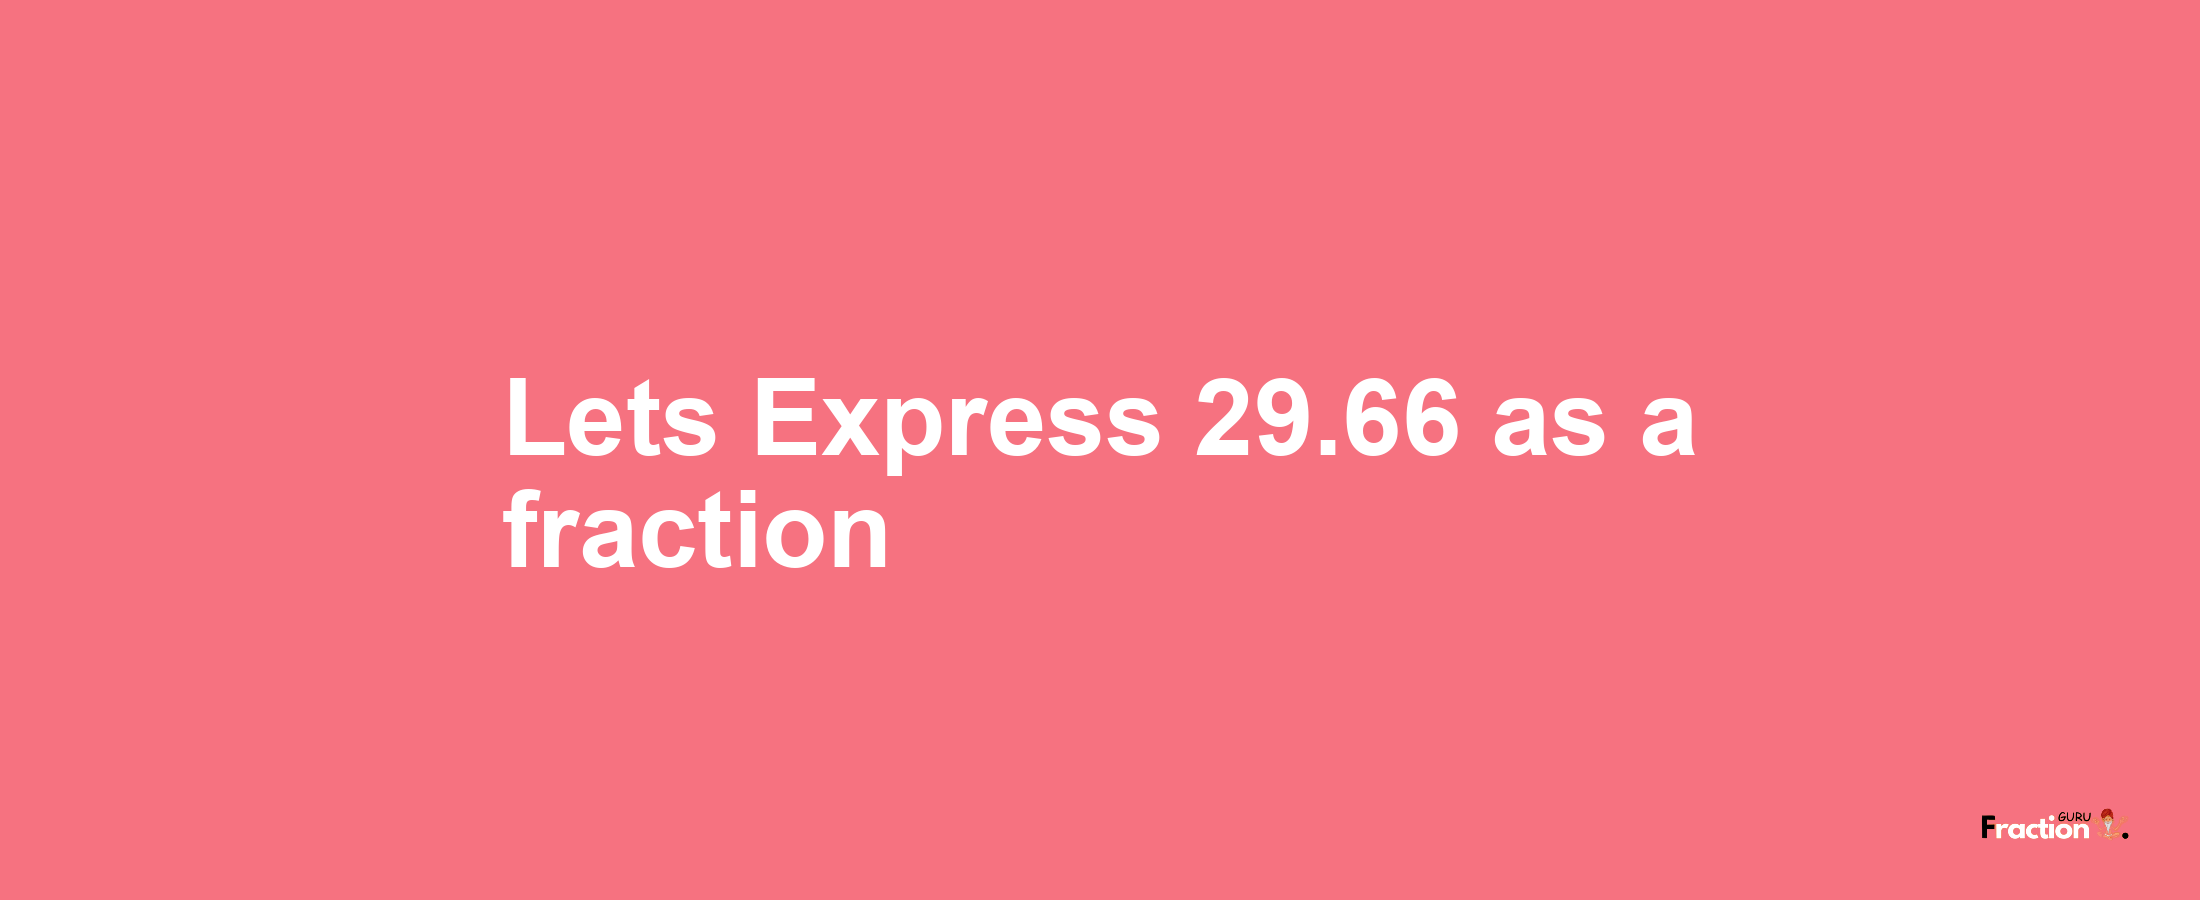 Lets Express 29.66 as afraction